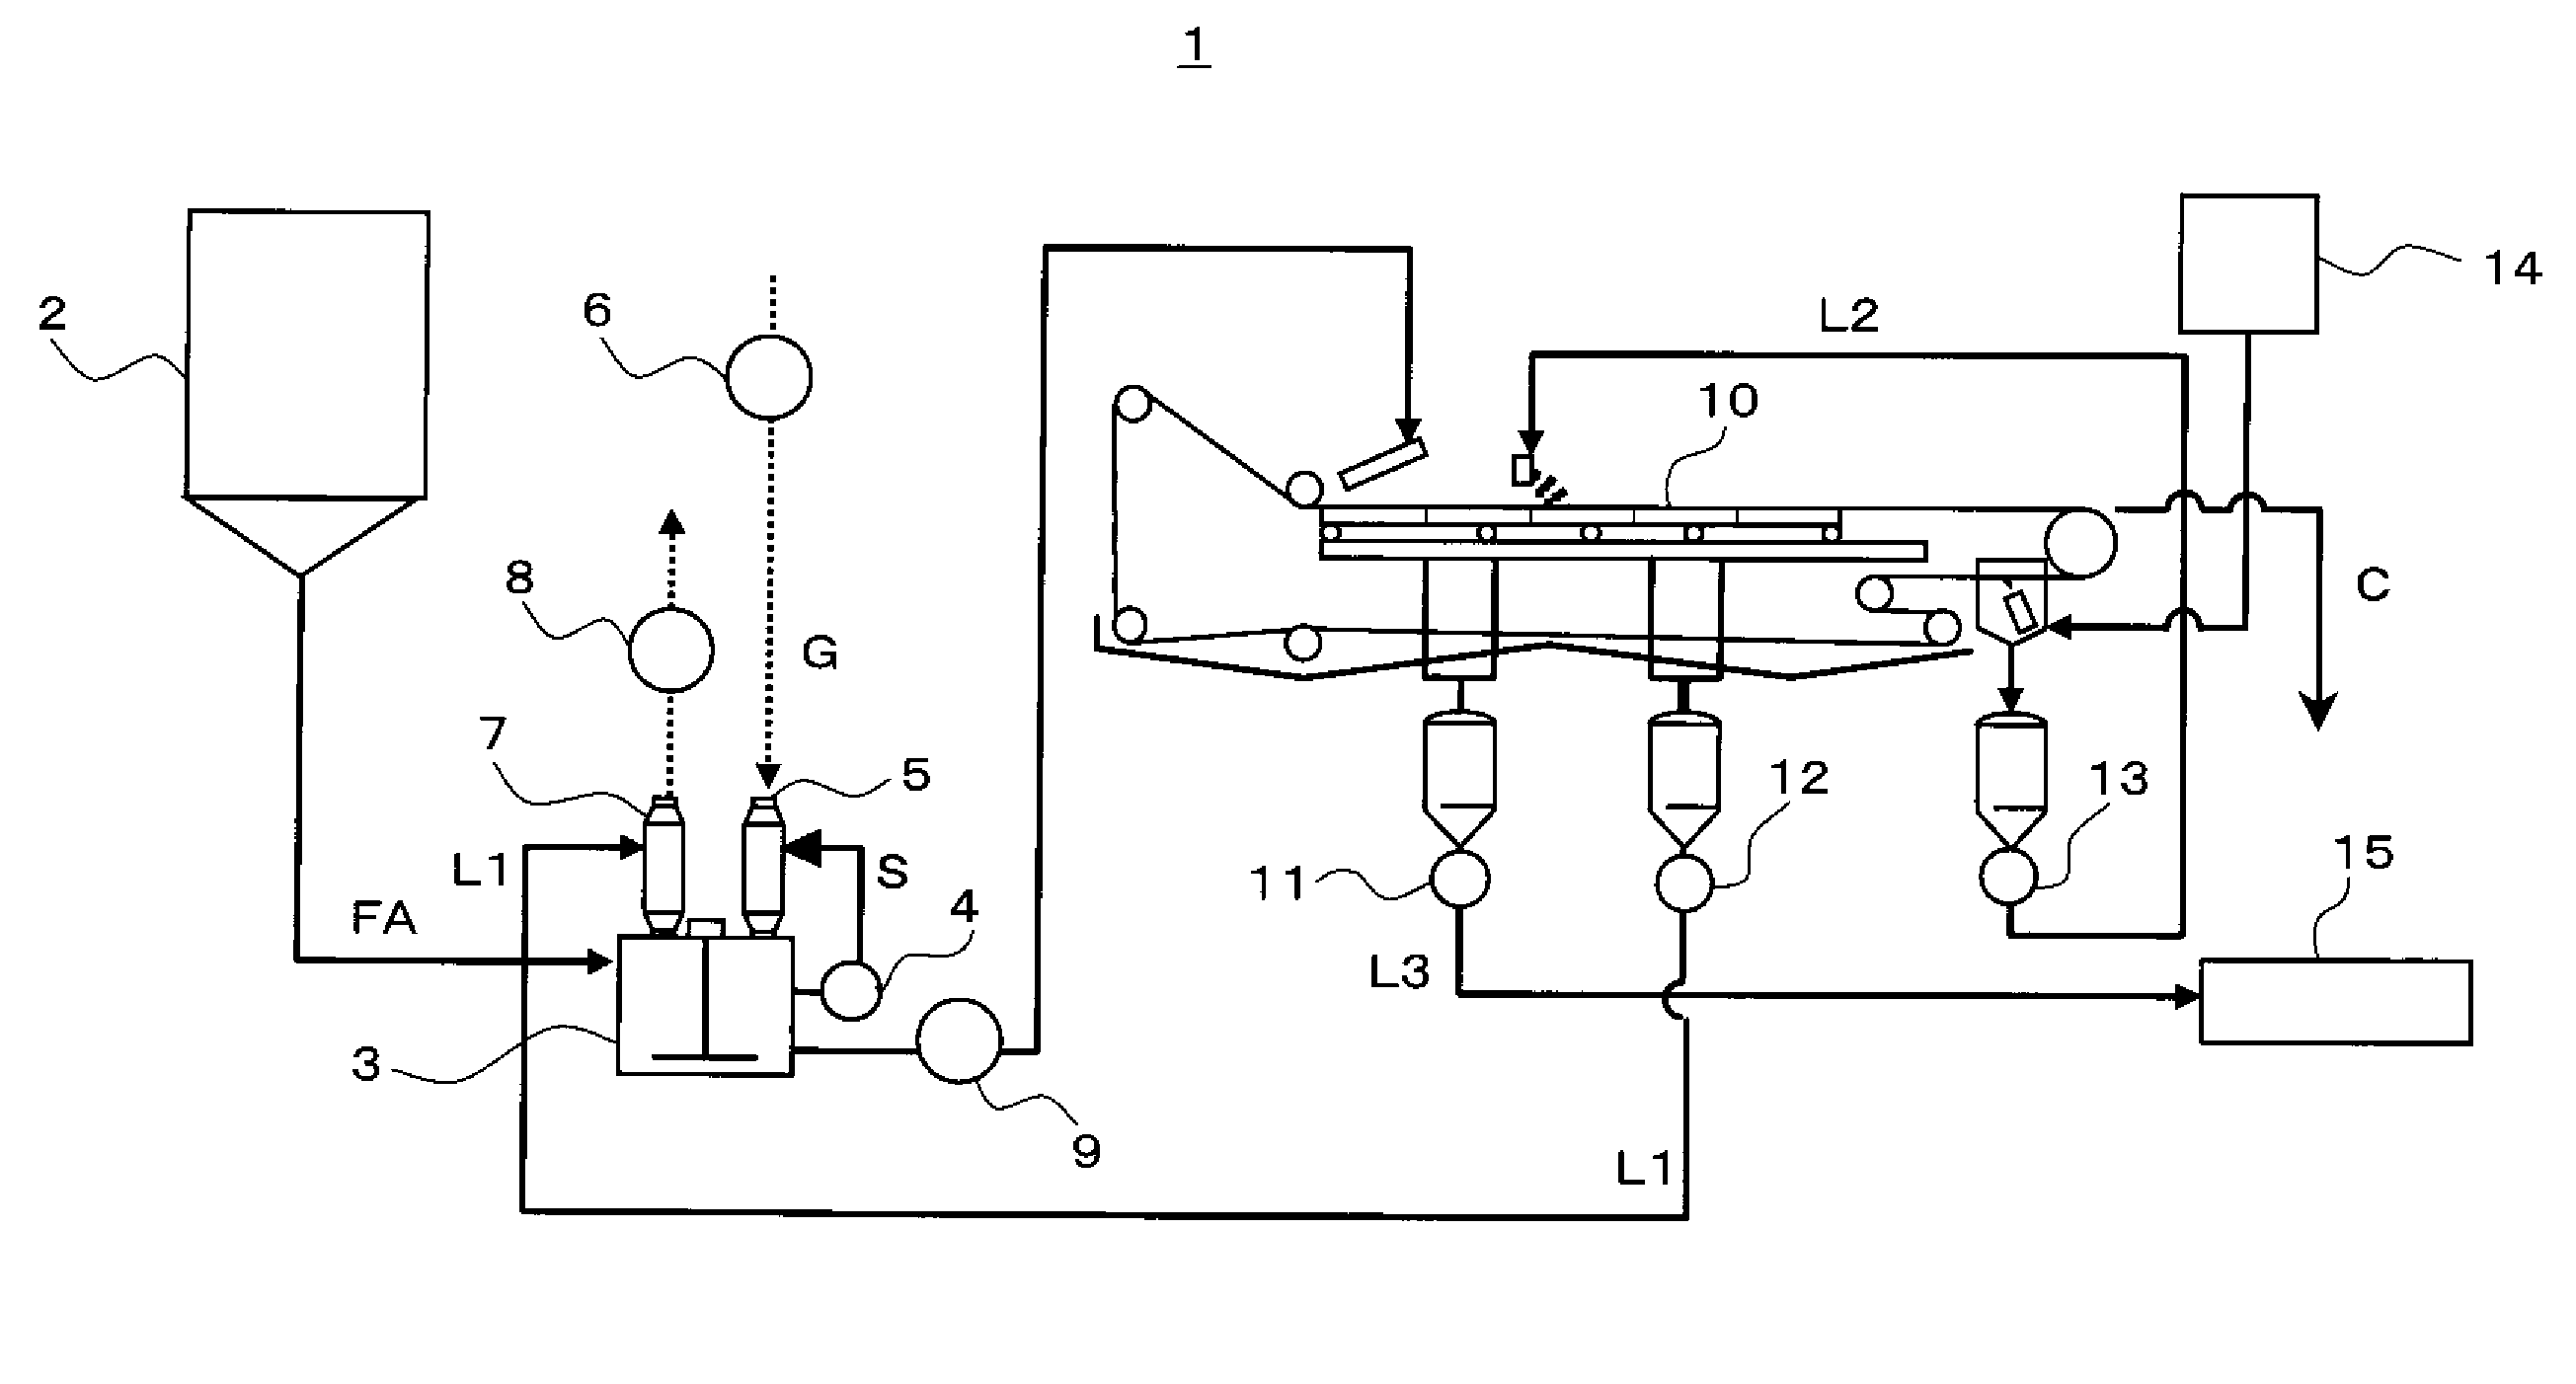 Apparatus and method for dissolution reaction